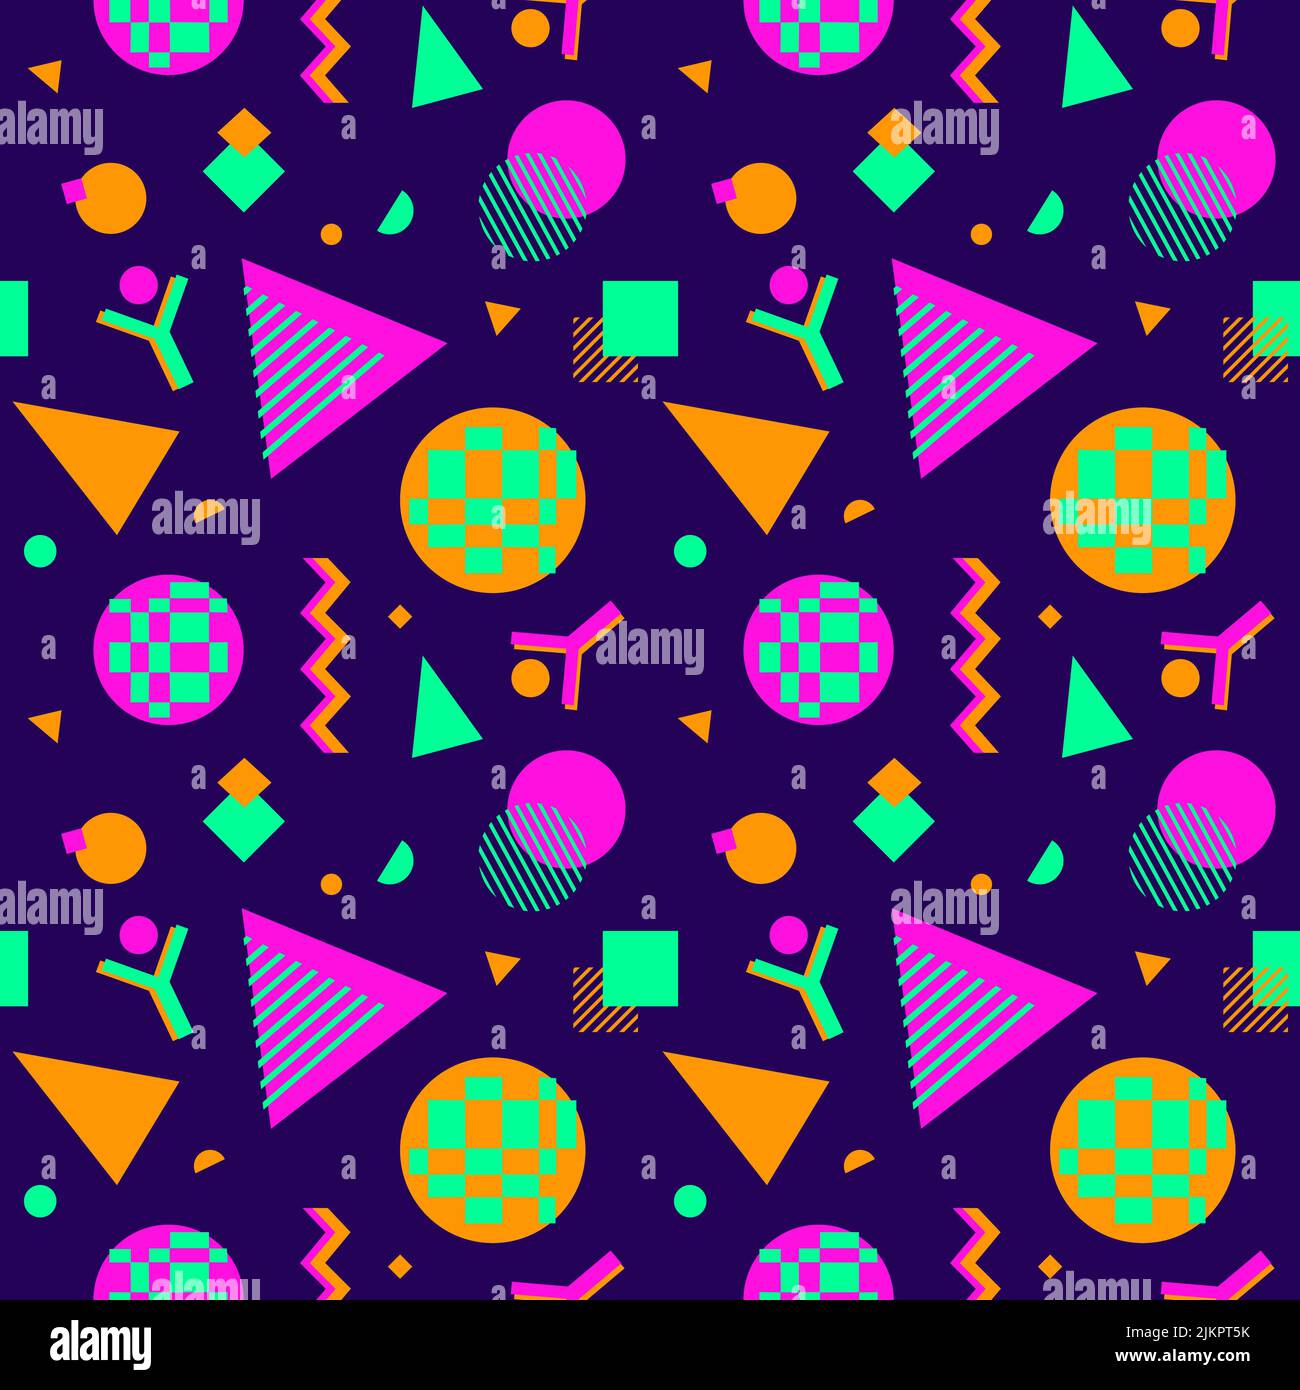 90s Nostalgia fashion vector seamlees pattern background. Cool color vintage style. Evoke 90s fashion arsthetic. Think bold, bright vibrant color Stock Vector